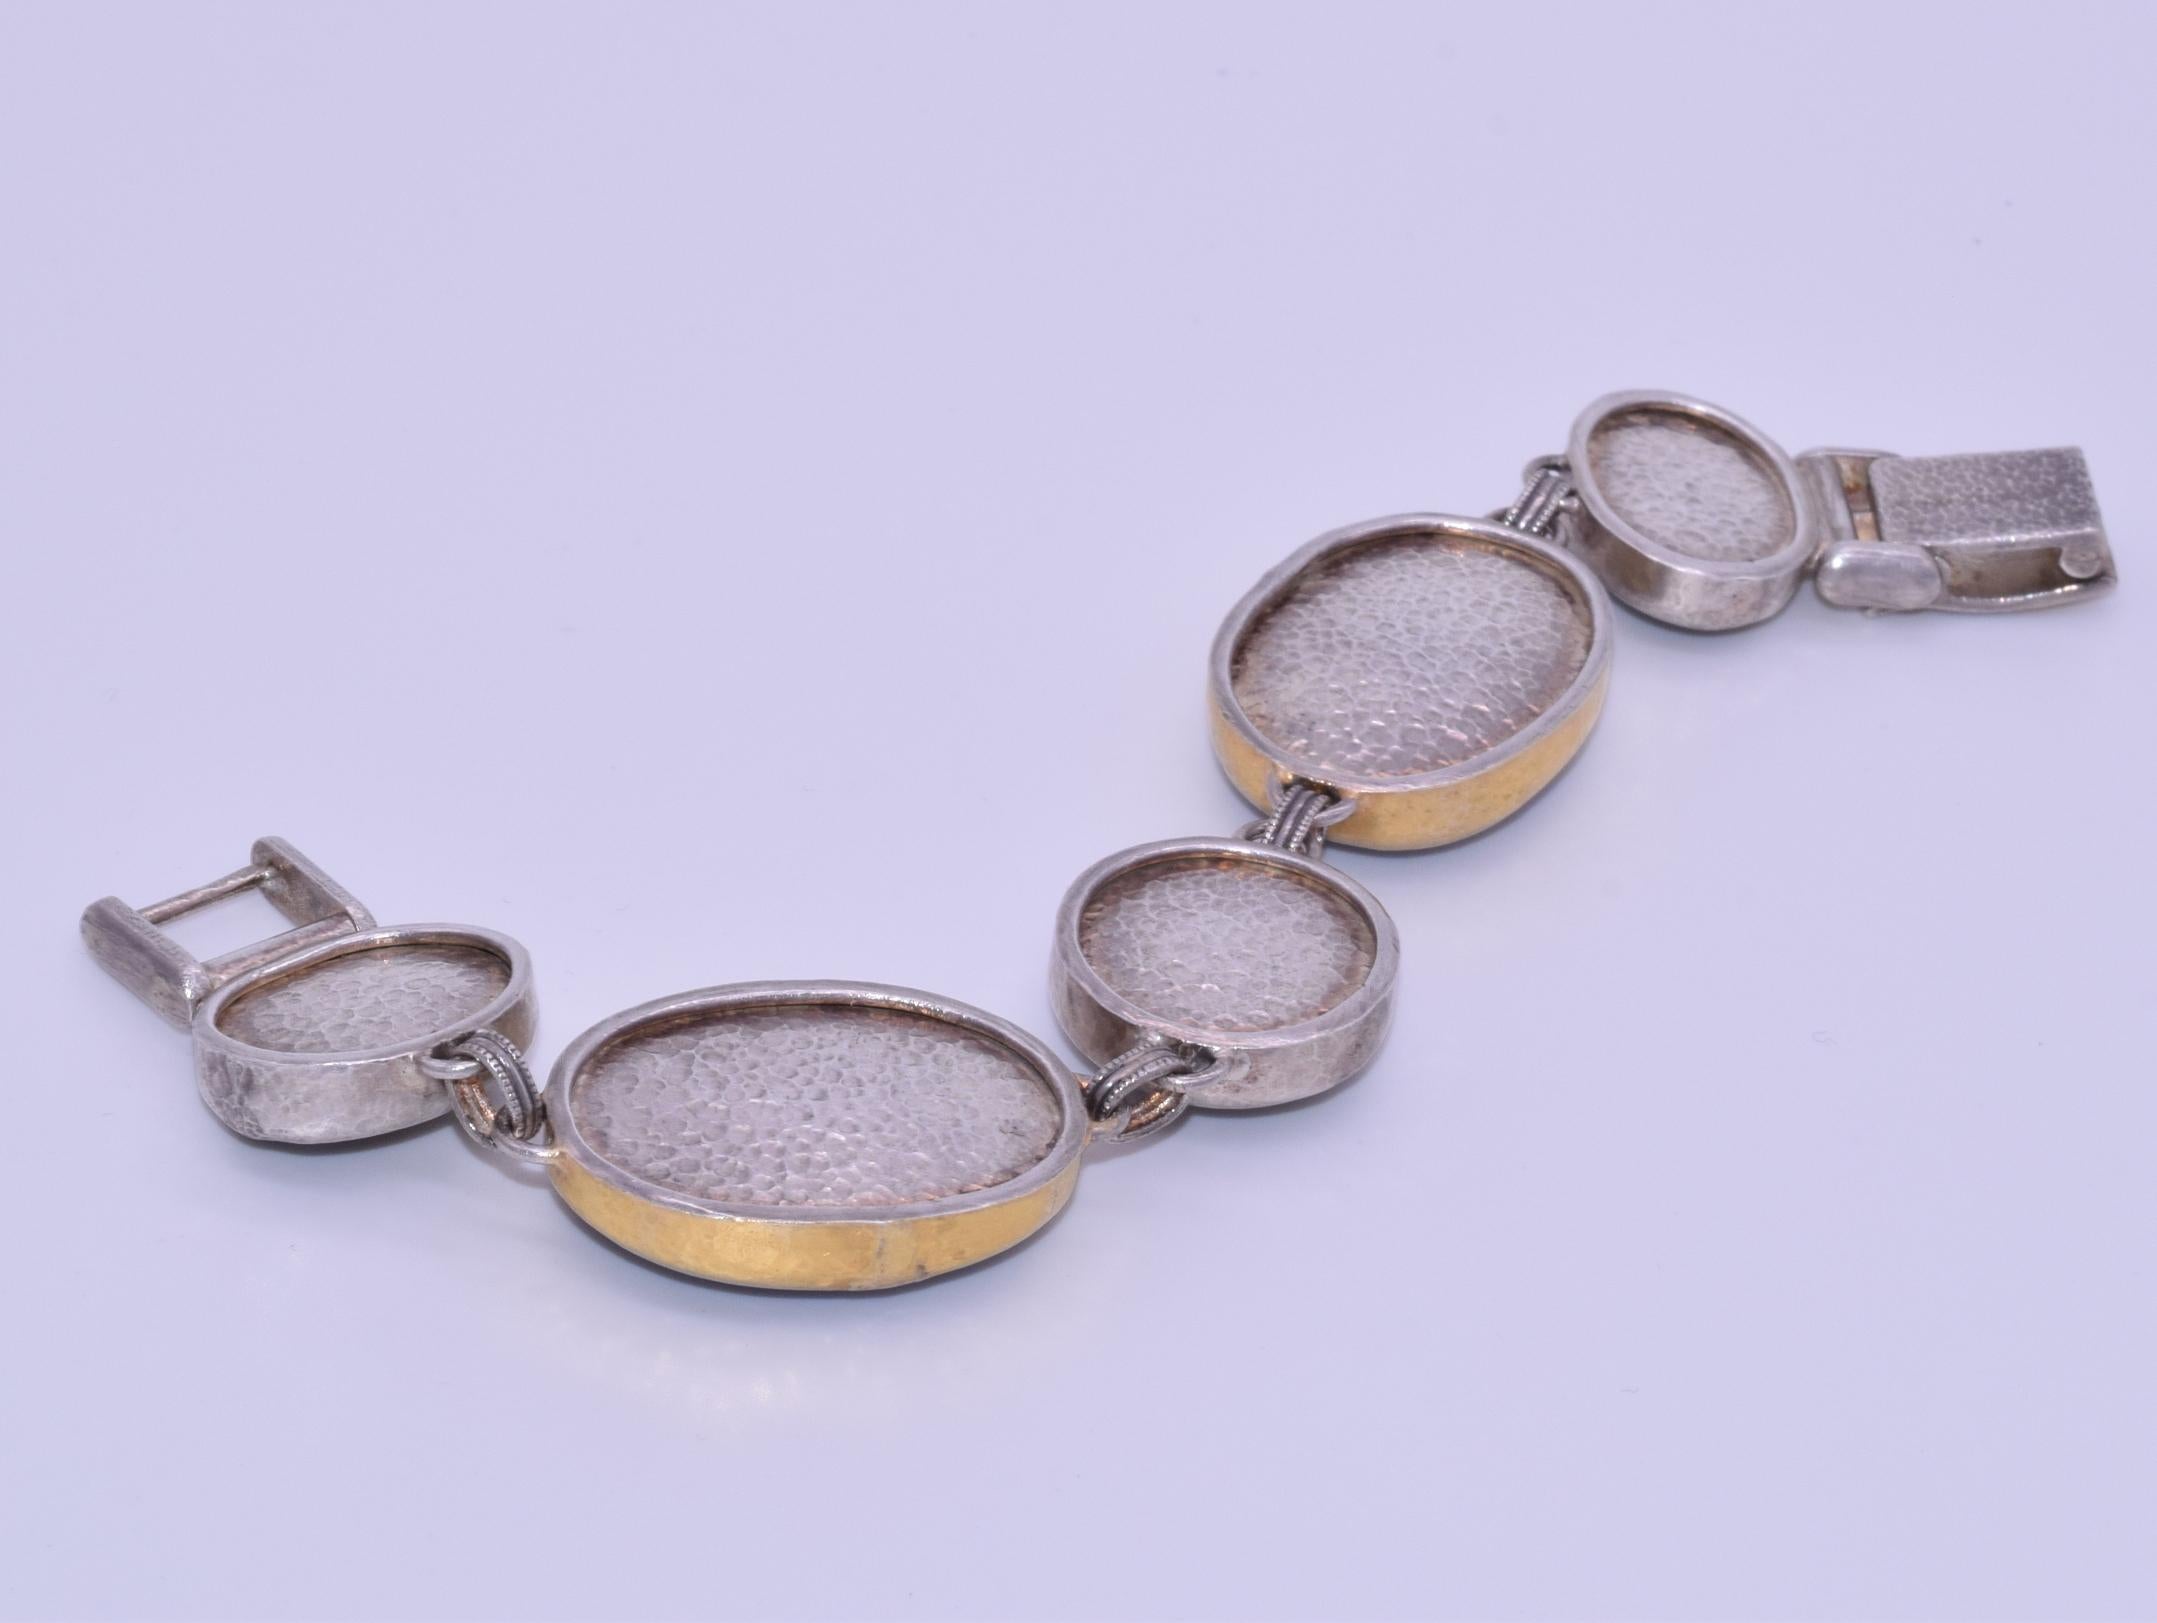 Five cabochon labradorite stones alternating in size are set in sterling silver and 24K yellow gold hand-hammered bezels featuring a two tone clasp signed Gurhan. Length: 7in, 22.85mm at the widest point.